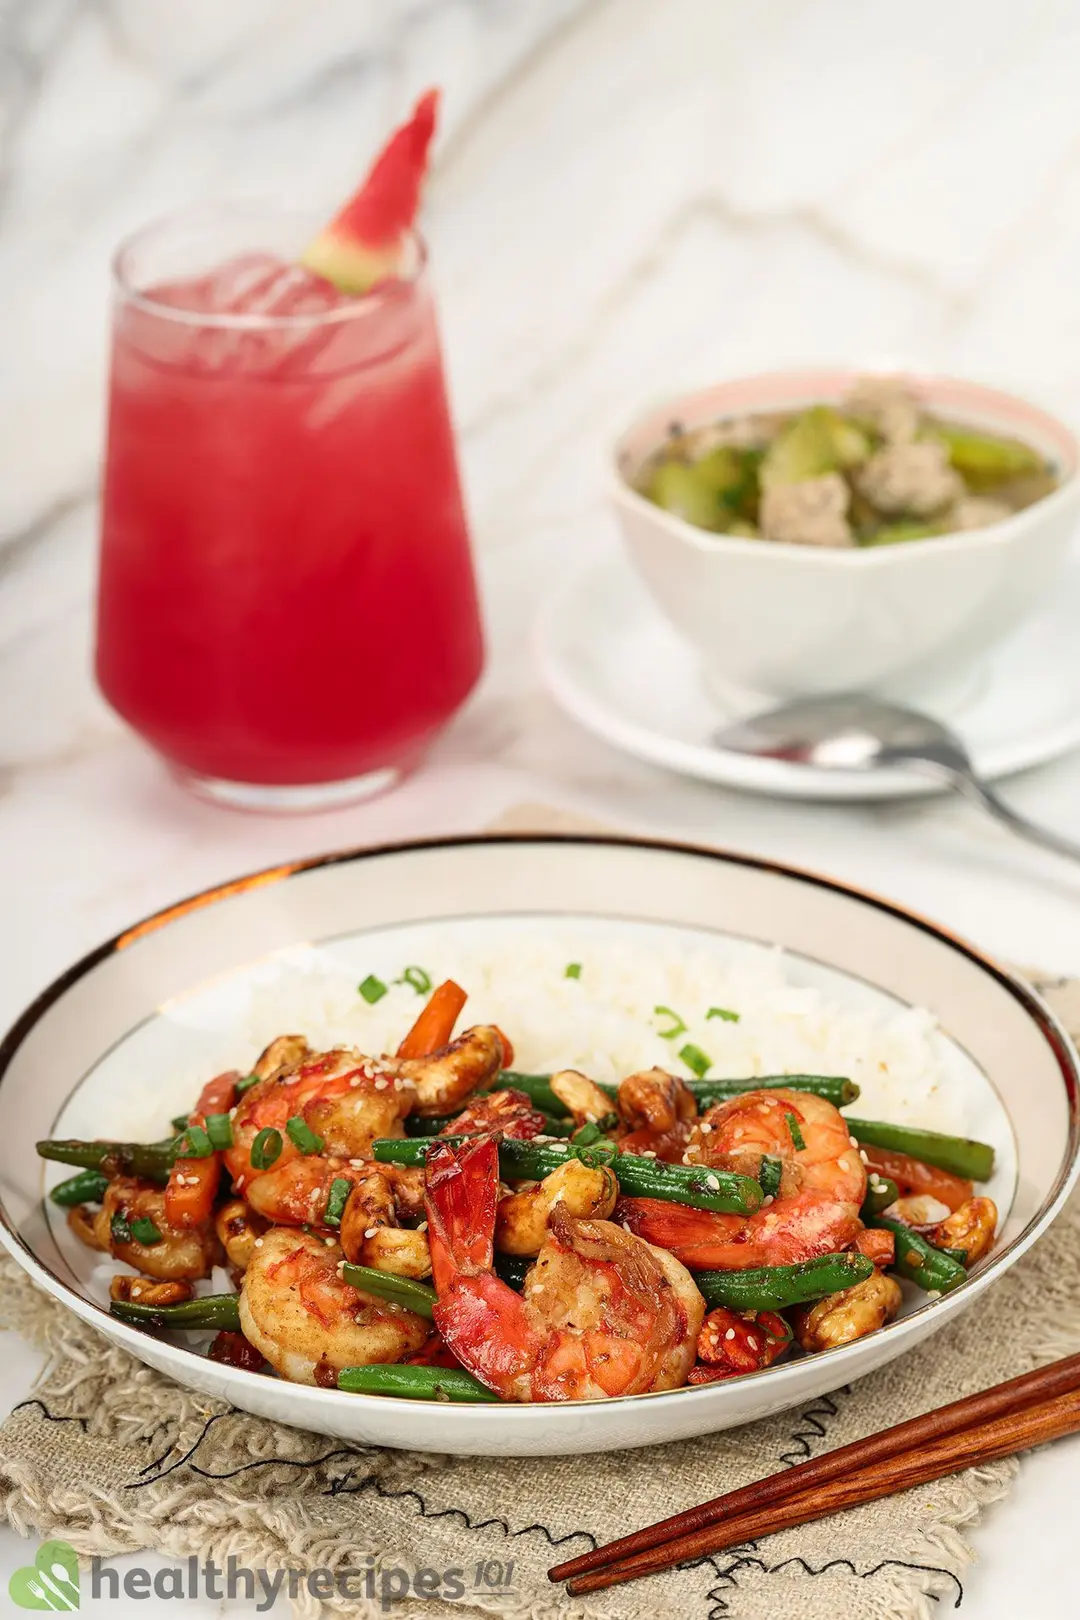 What to Serve With Cashew Shrimp